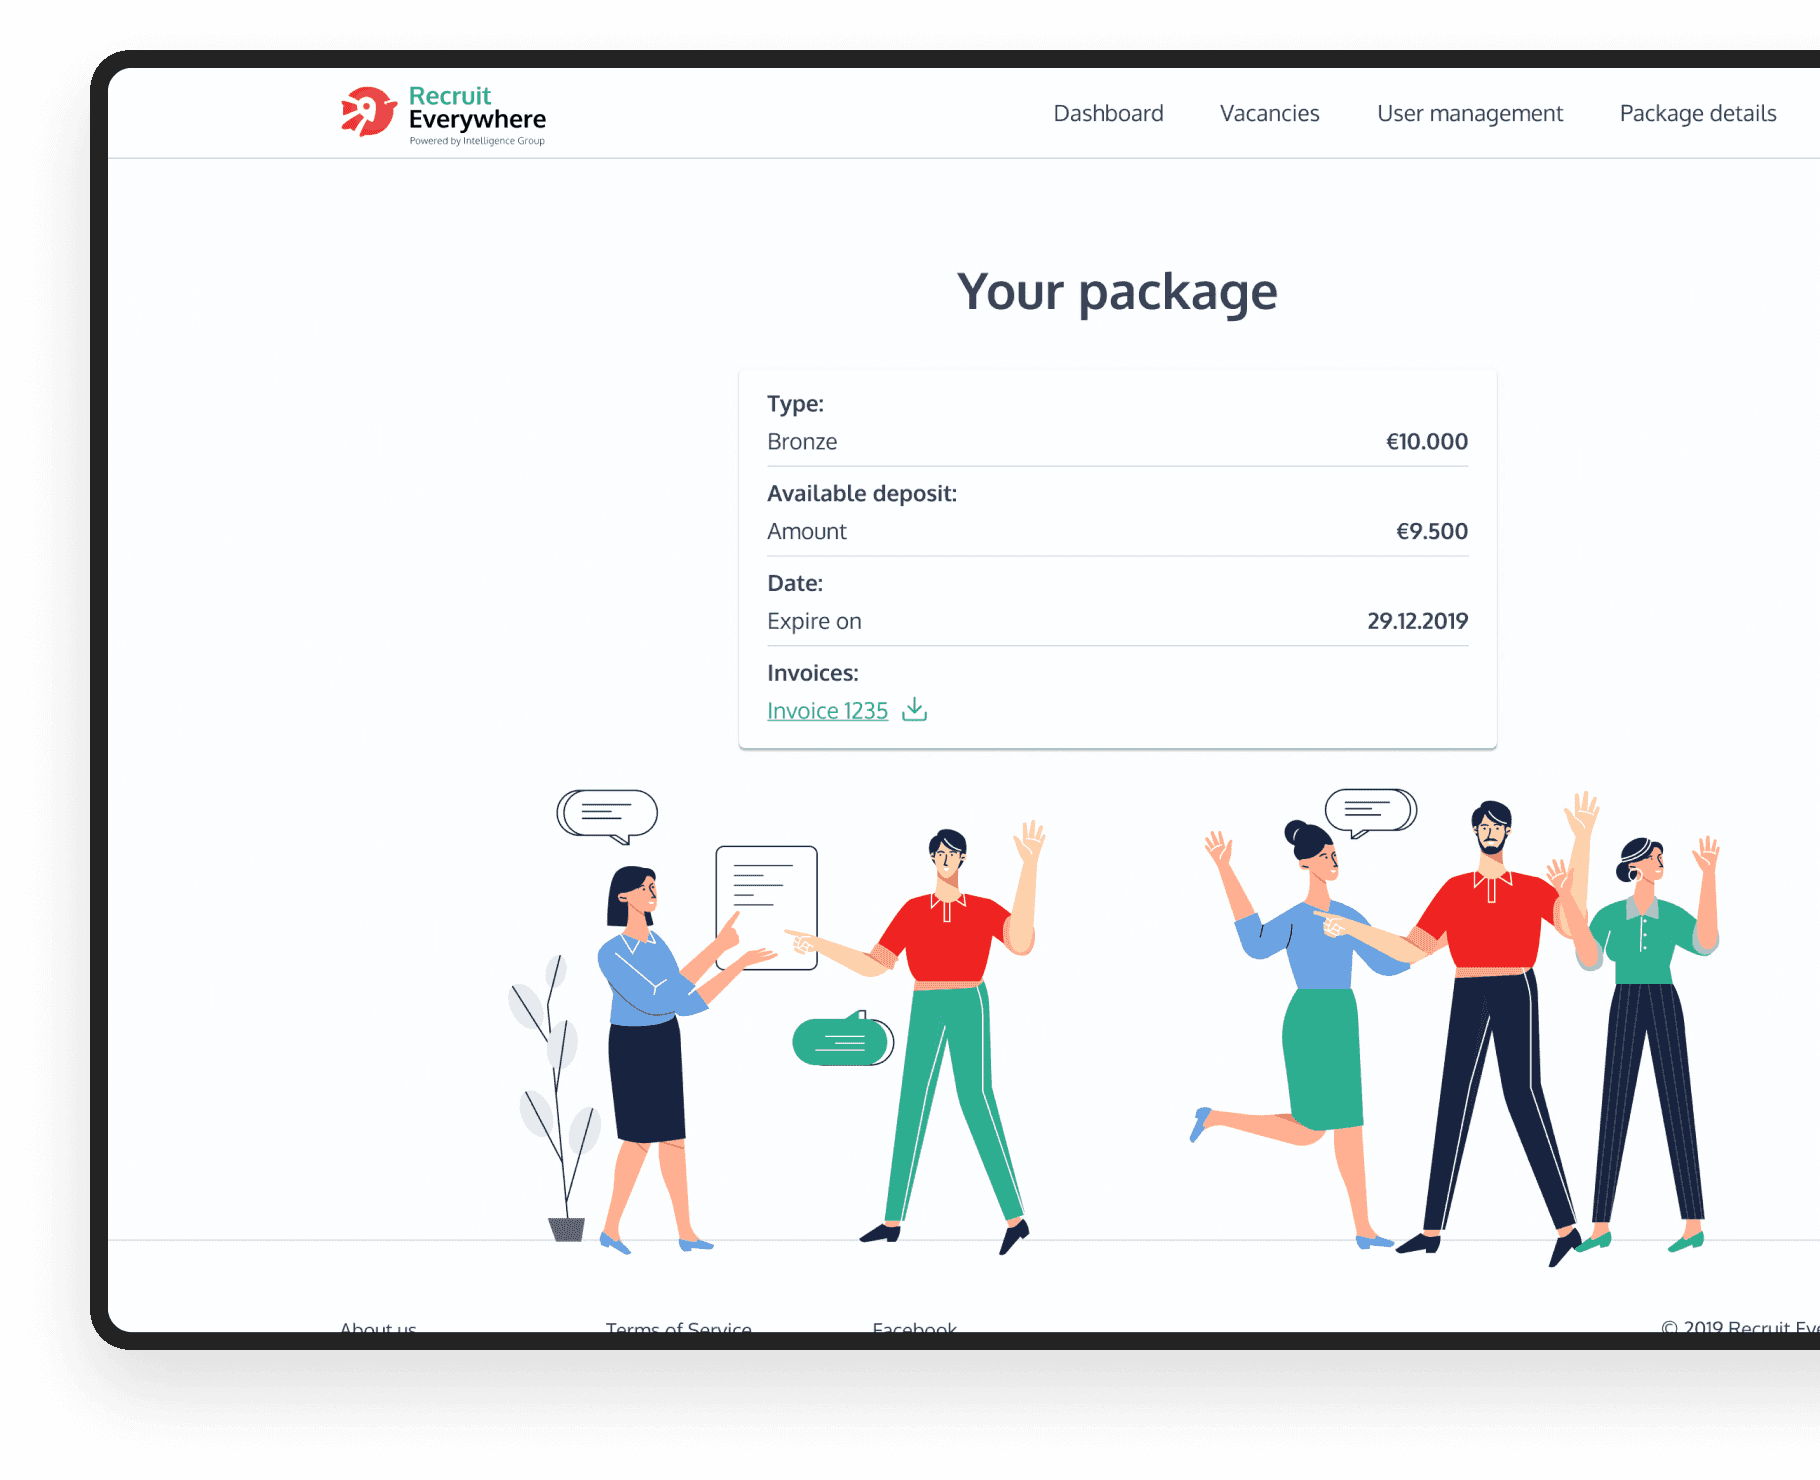 Intuitive checkout process for the online hiring platform